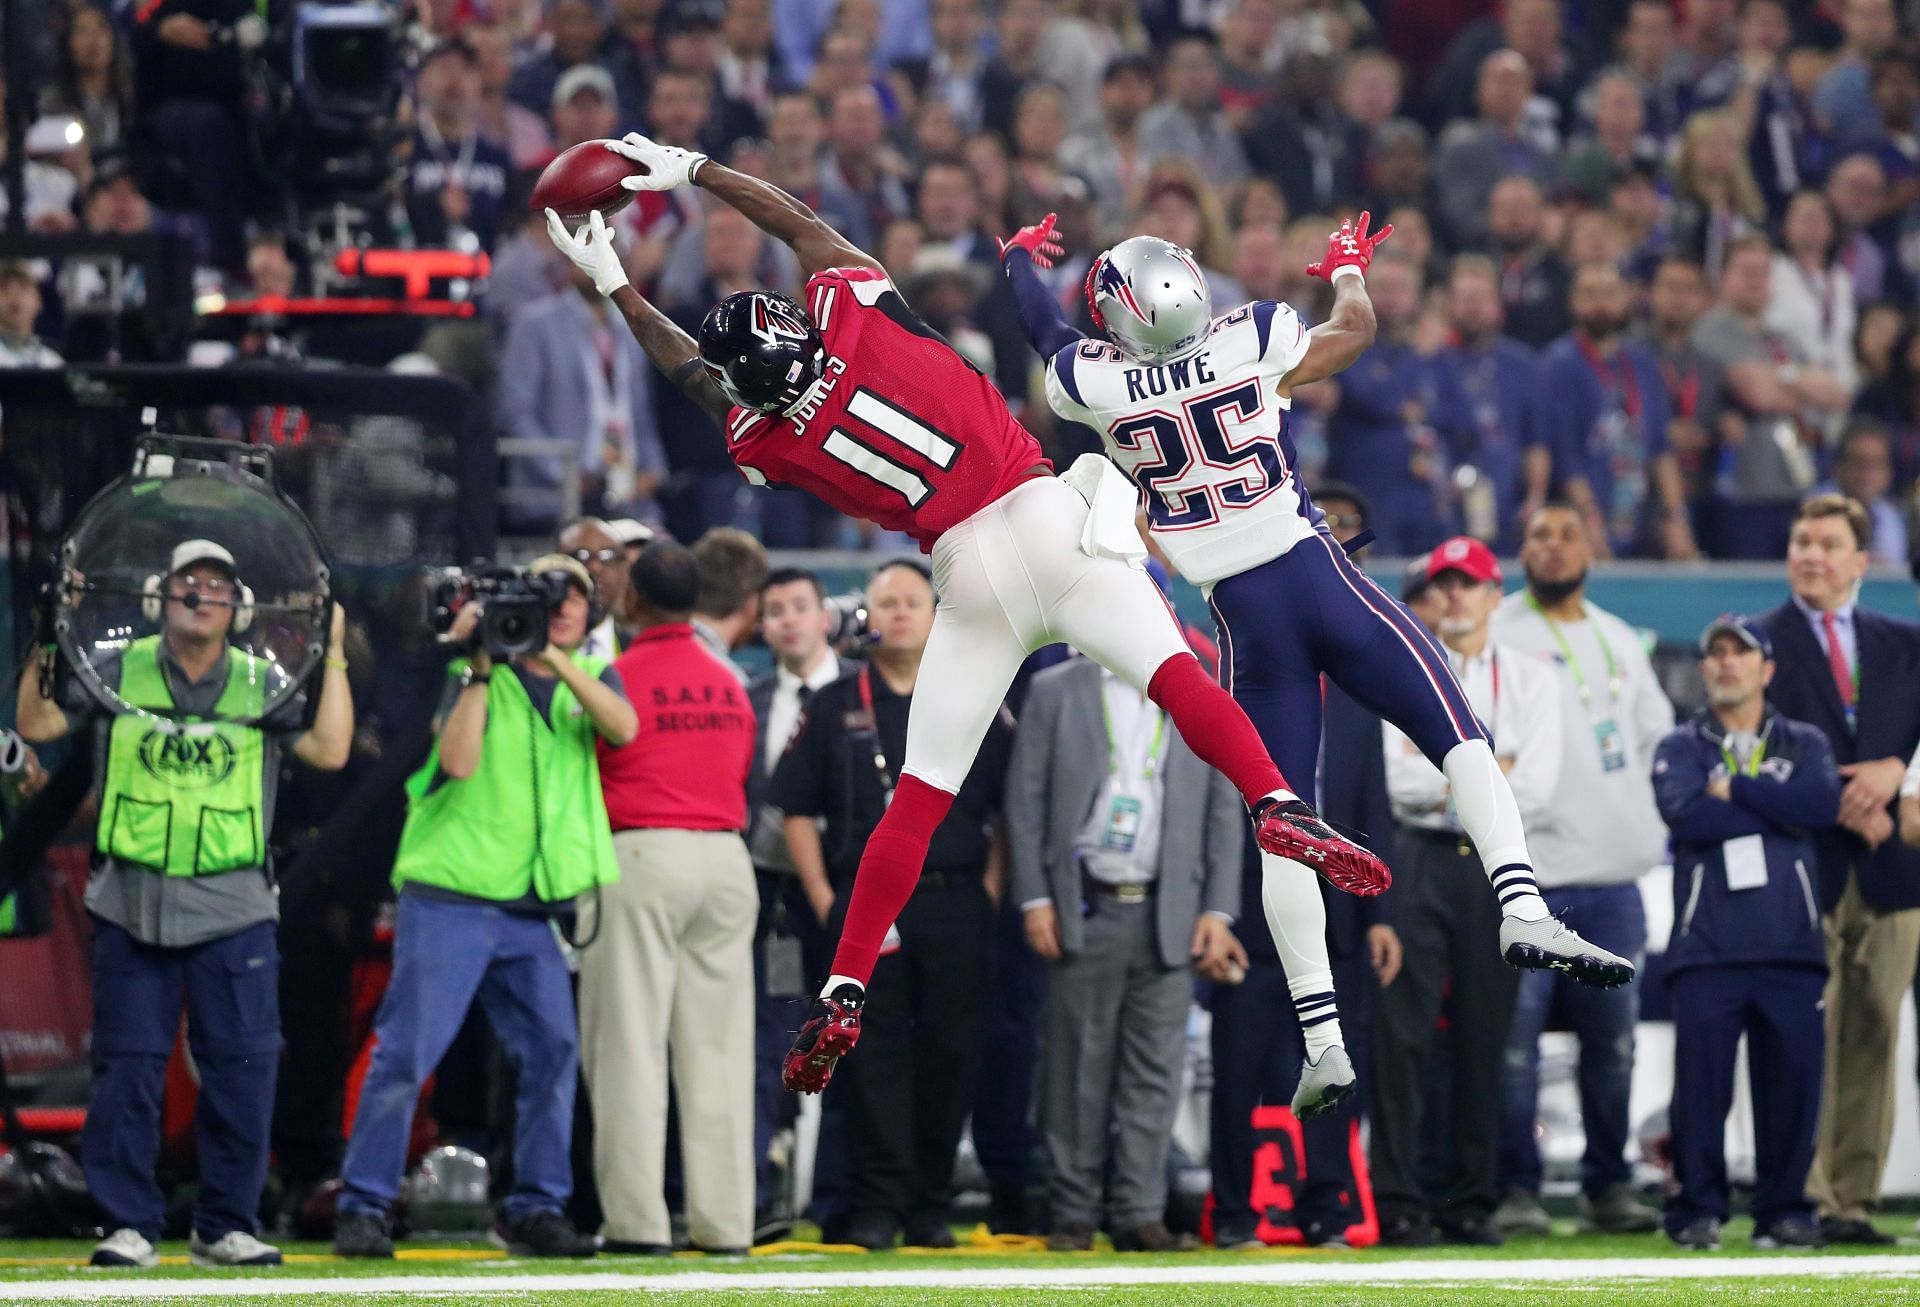 Julio Jones had one of the most memorable Super Bowl catches ever